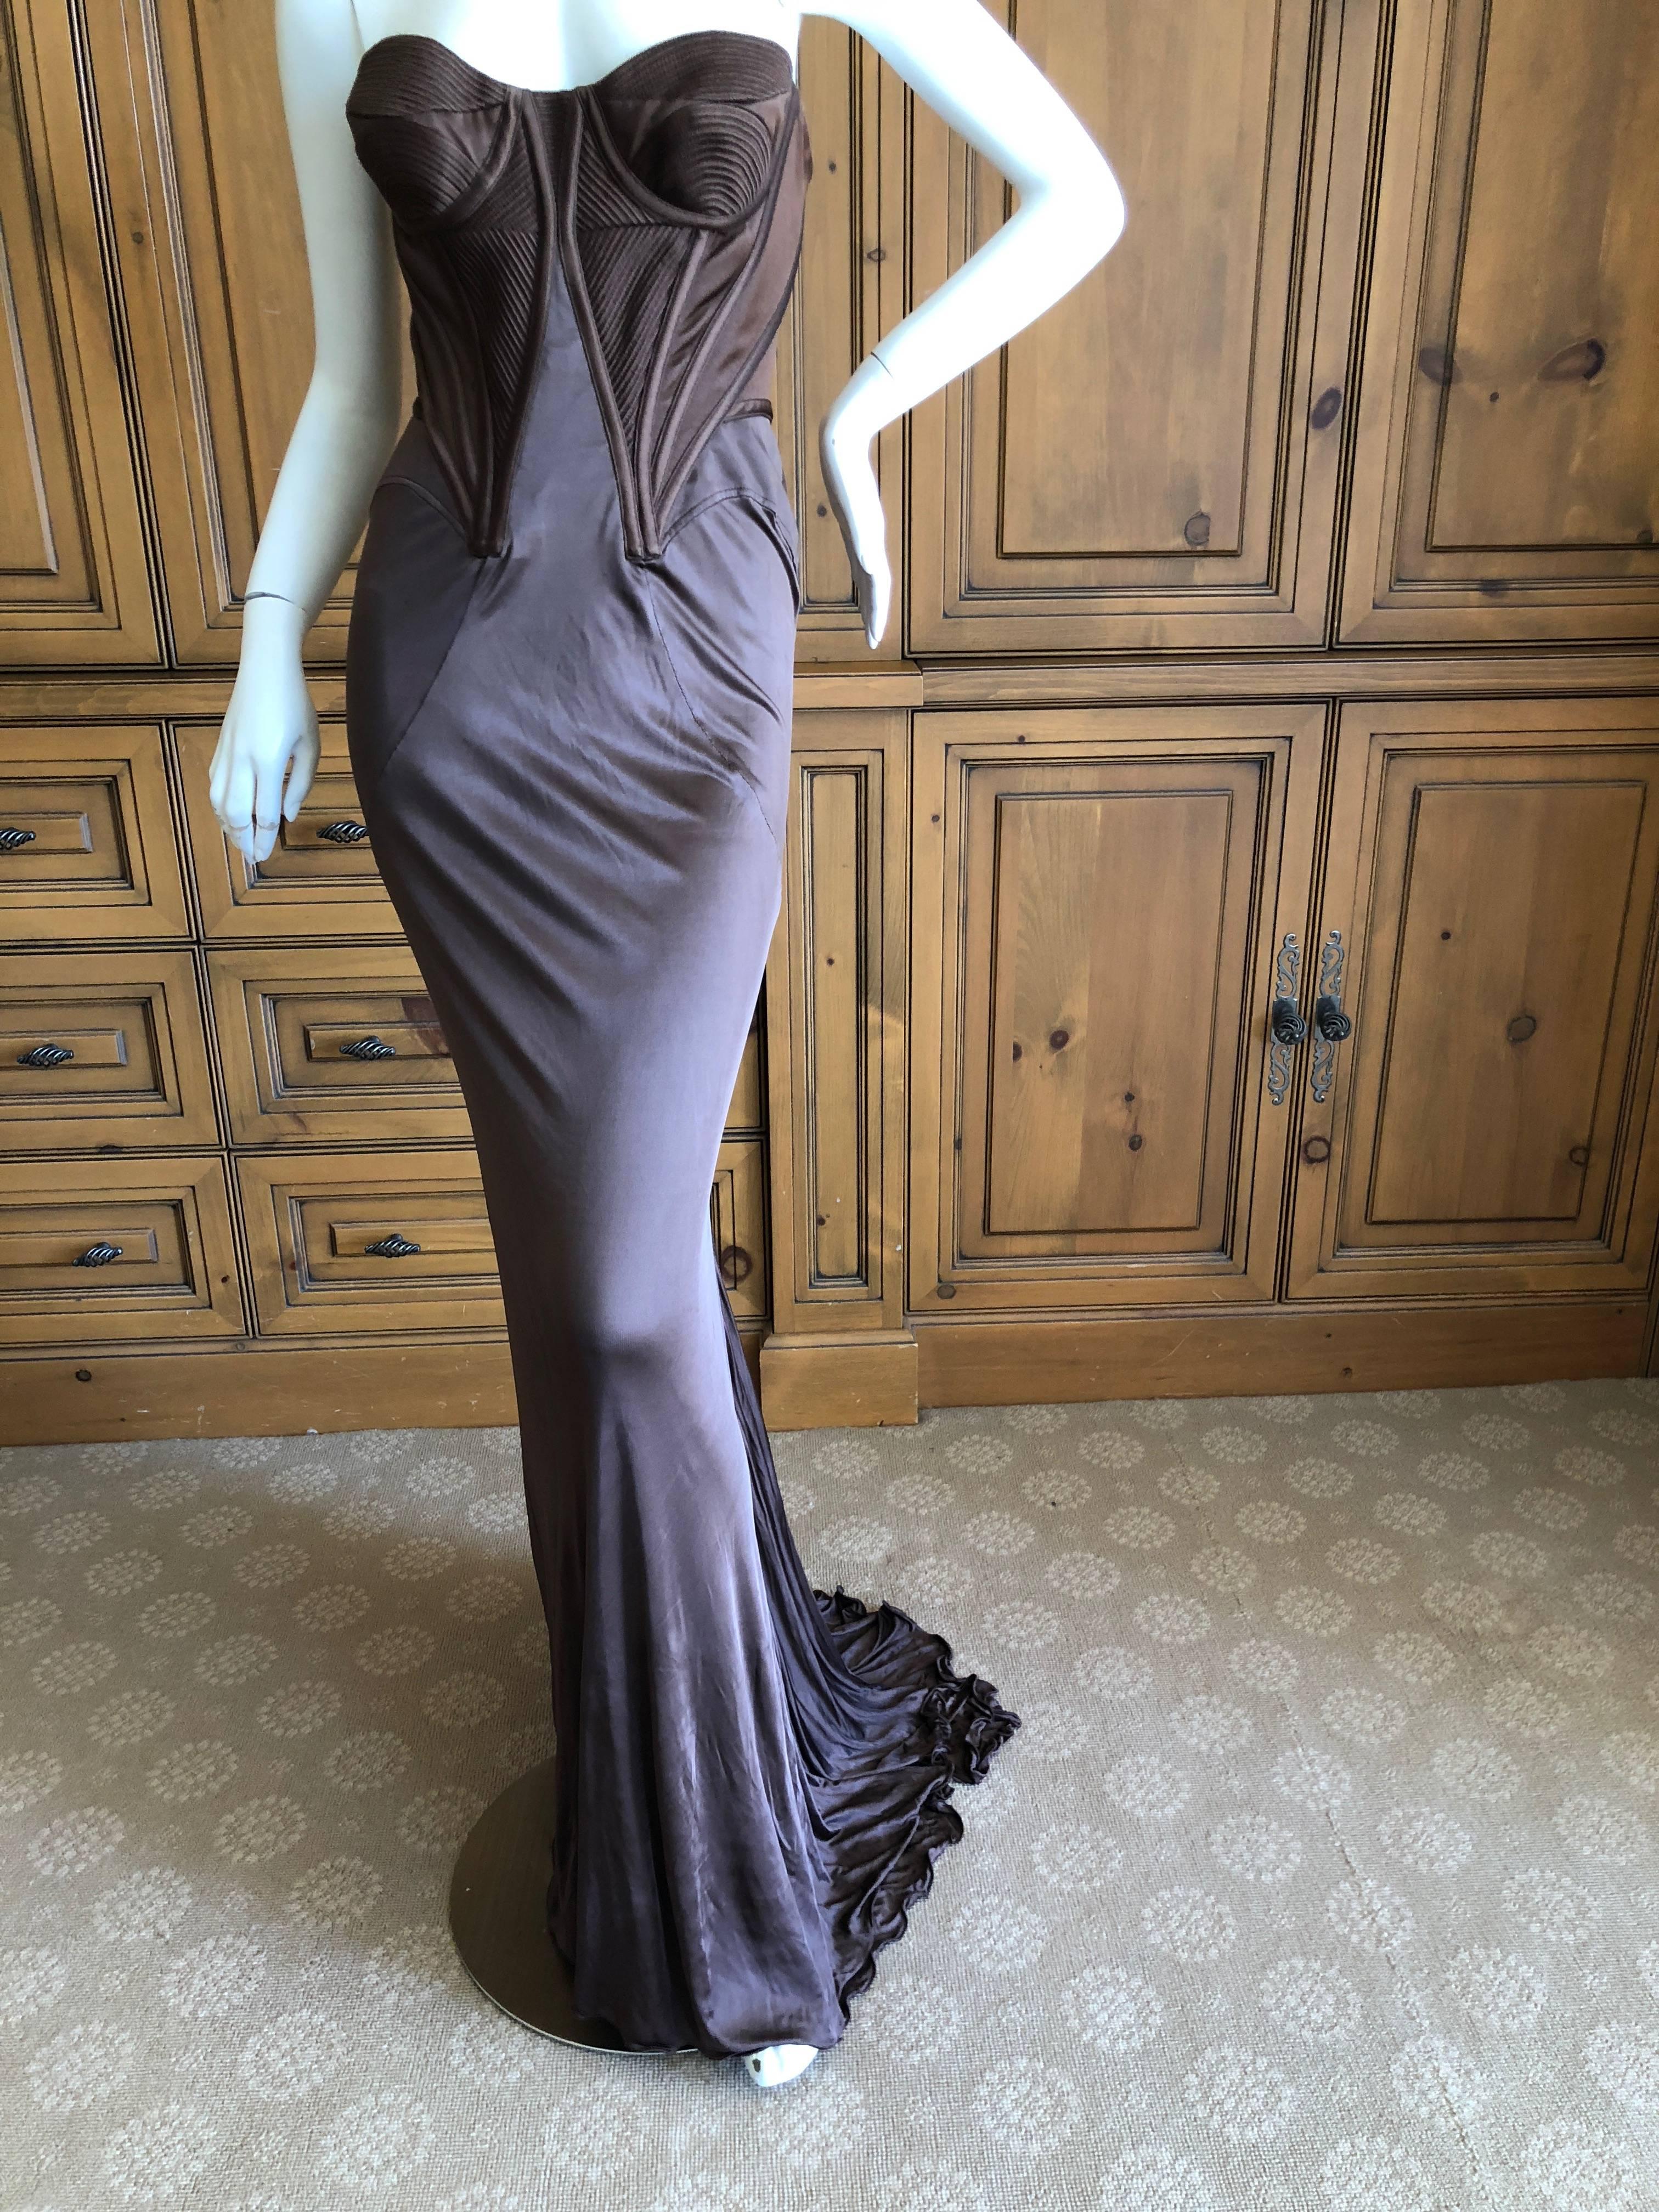 Versace Vintage strapless corset evening dress.
This is so pretty, photos don't quite capture it.
It is a rich chocolate brown, sorry the photos might appear purple.
New with tags, this originally was $8450 retail.
Size 42
 Bust: 36